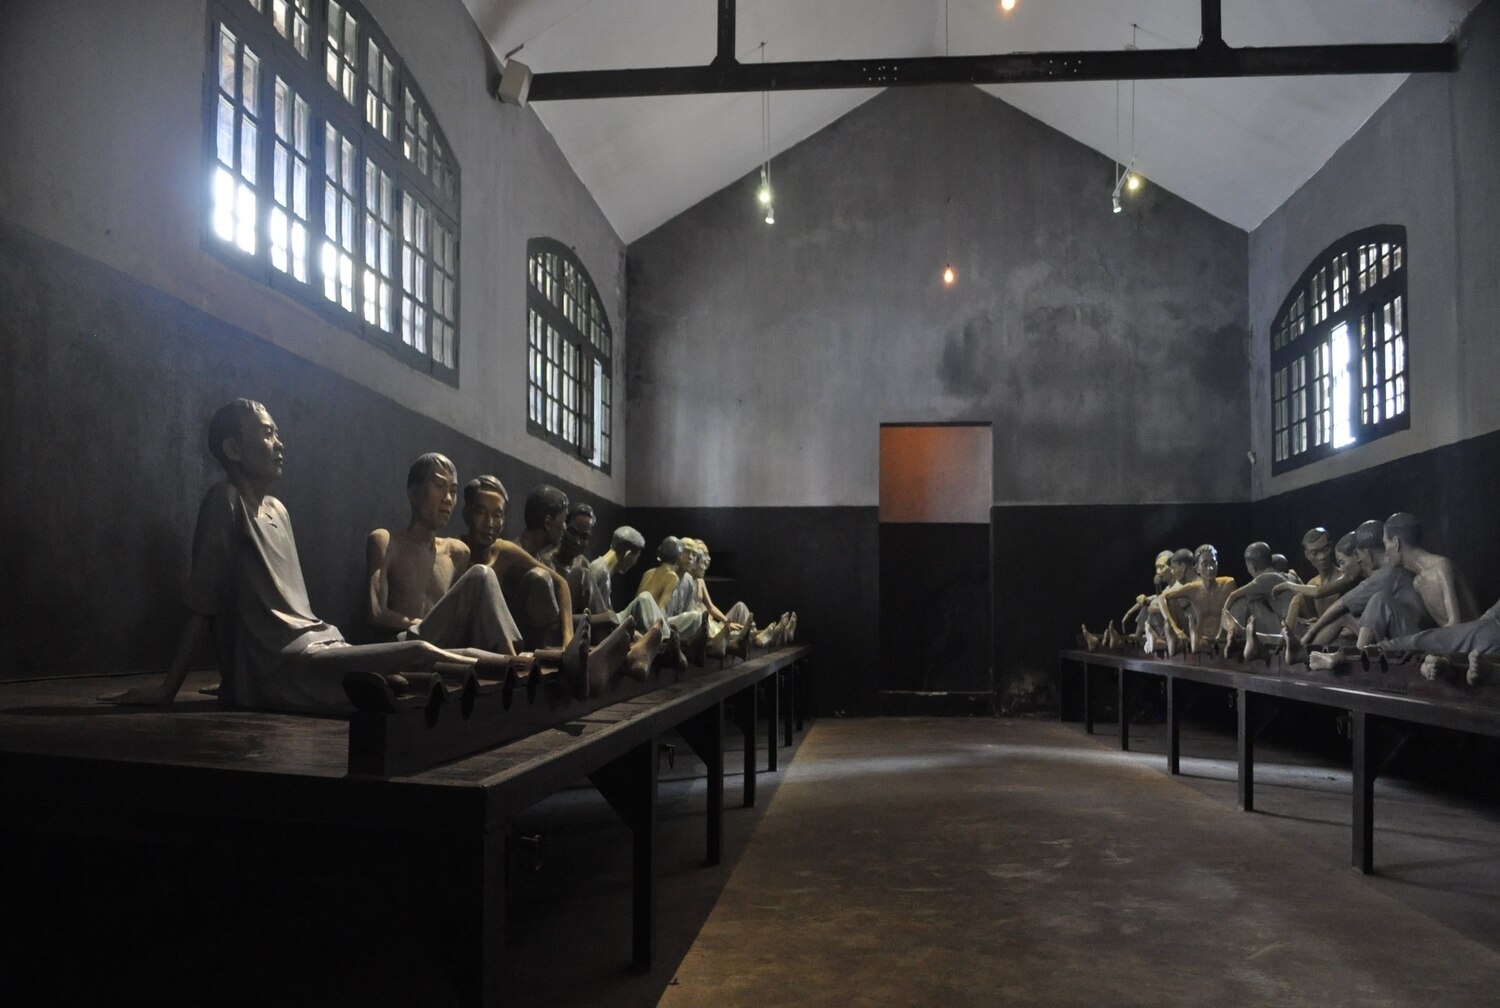 Interior of a museum gallery displaying classical statues of Vietnamese prisonners in a row.